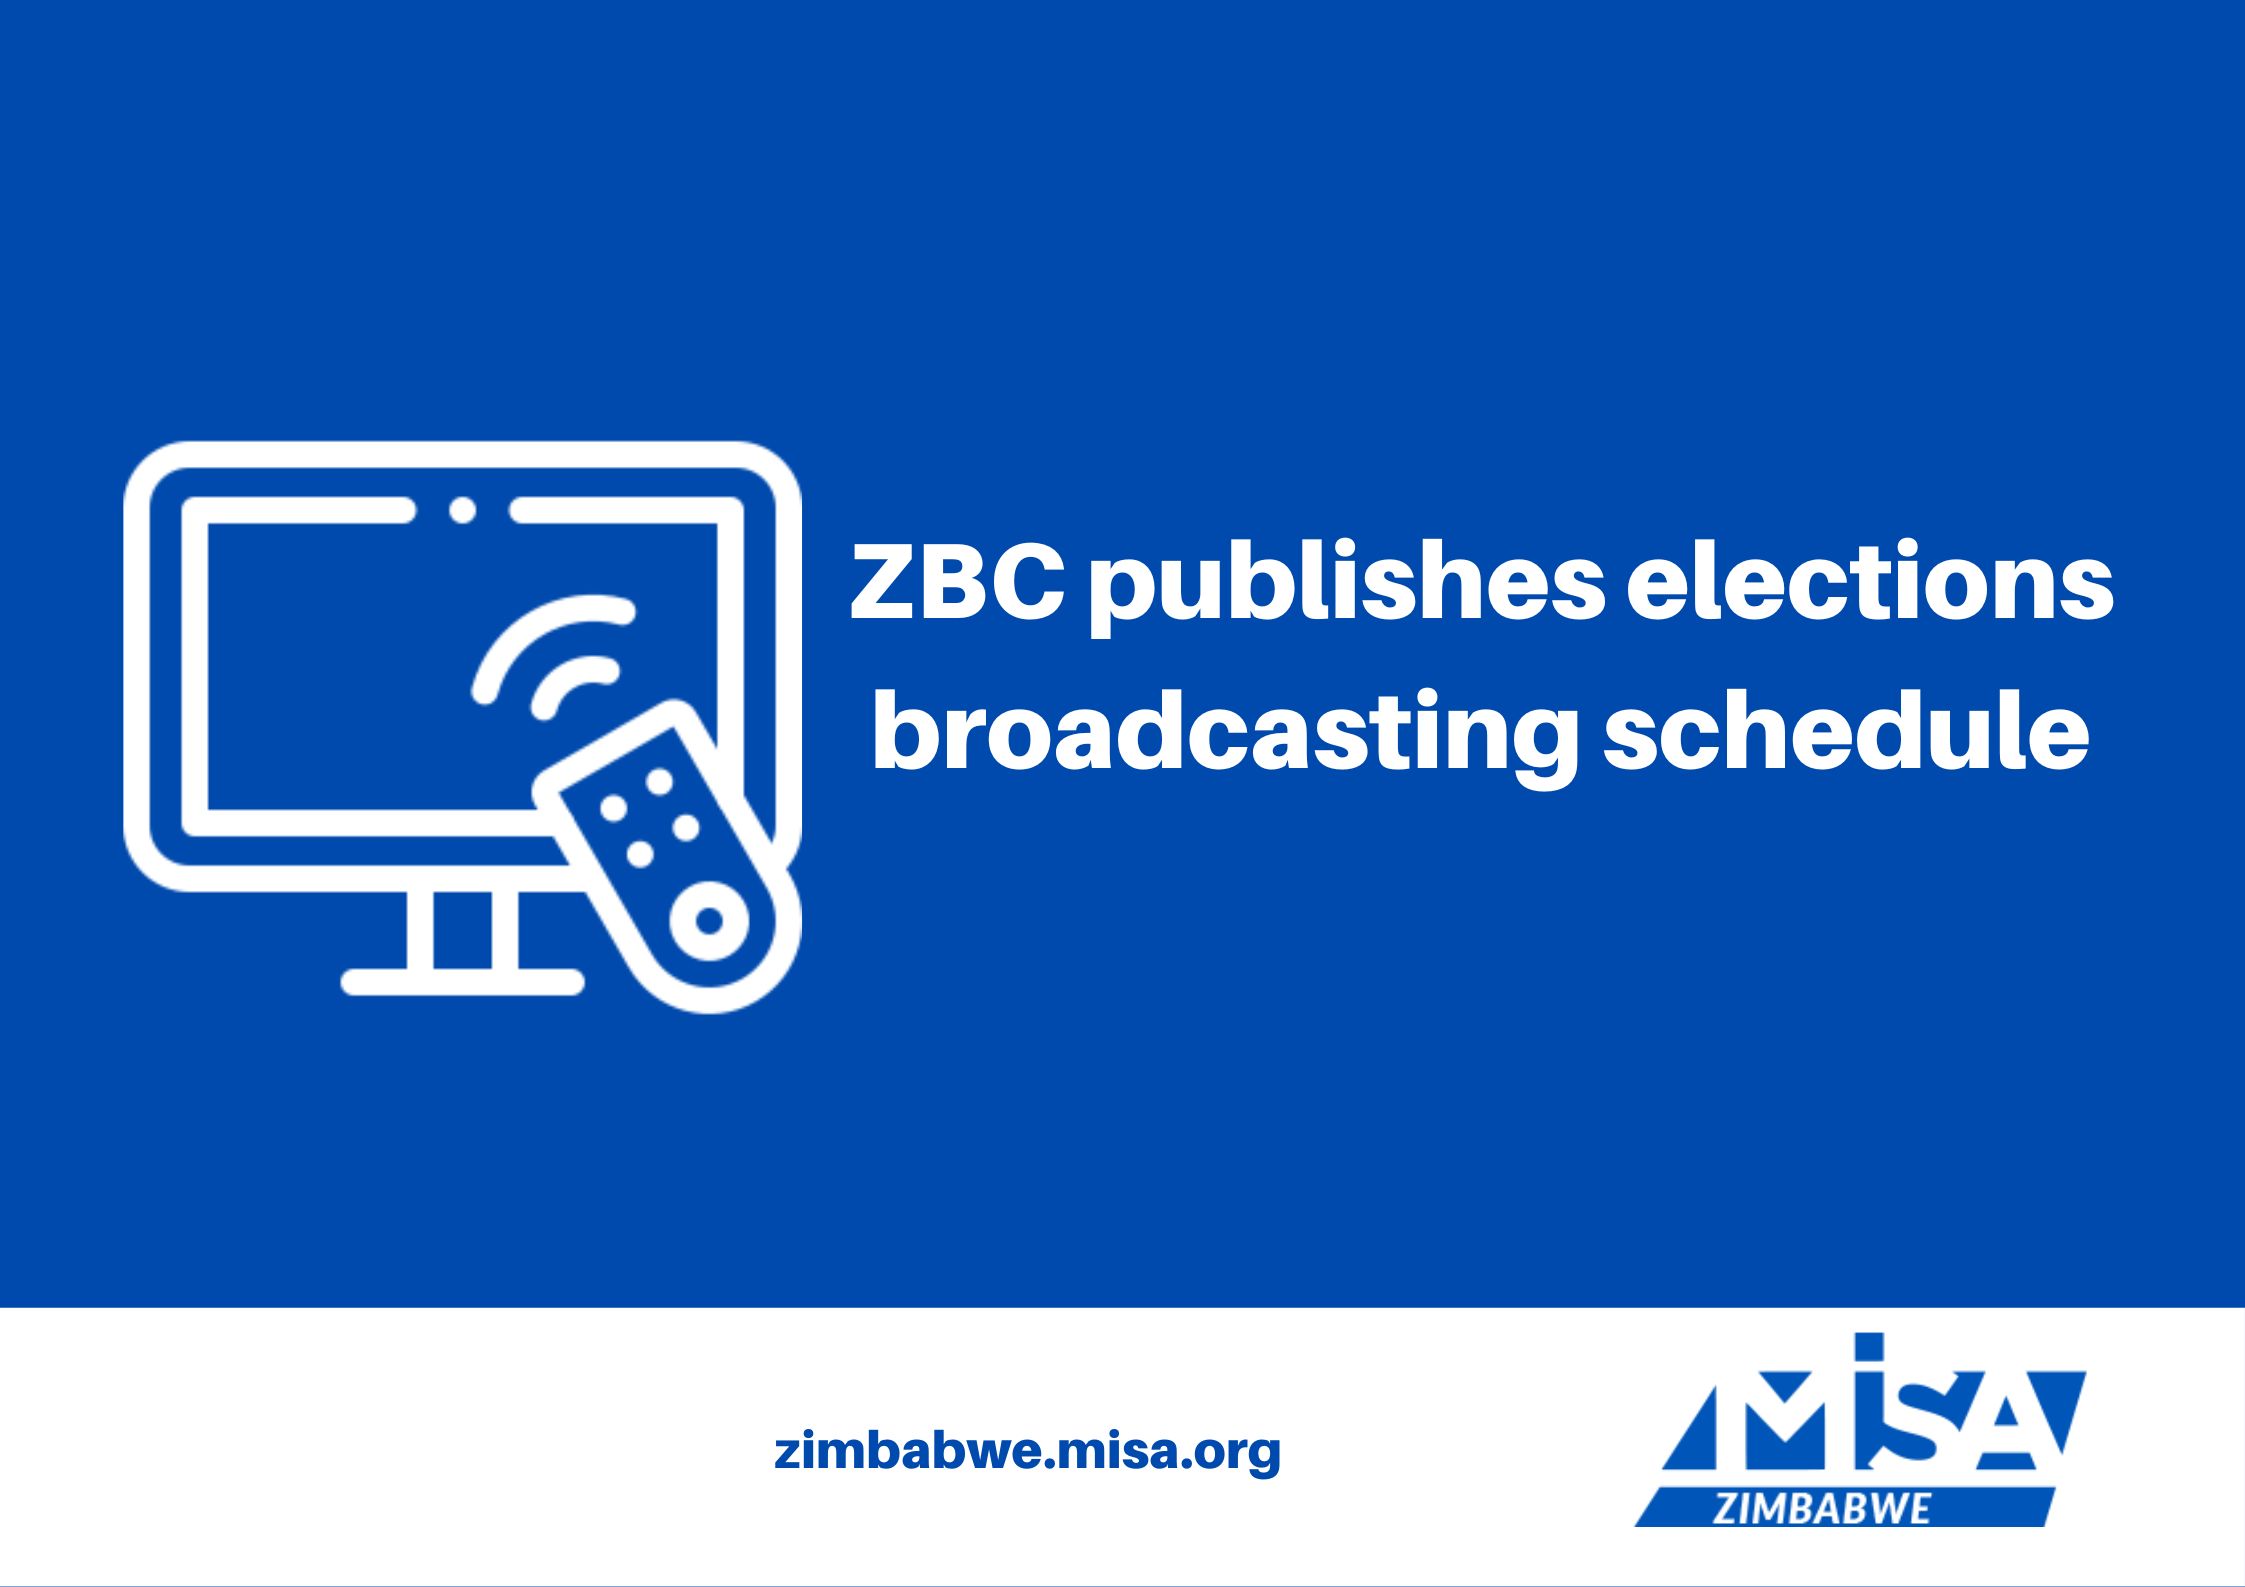 ZBC publishes elections broadcasting schedule